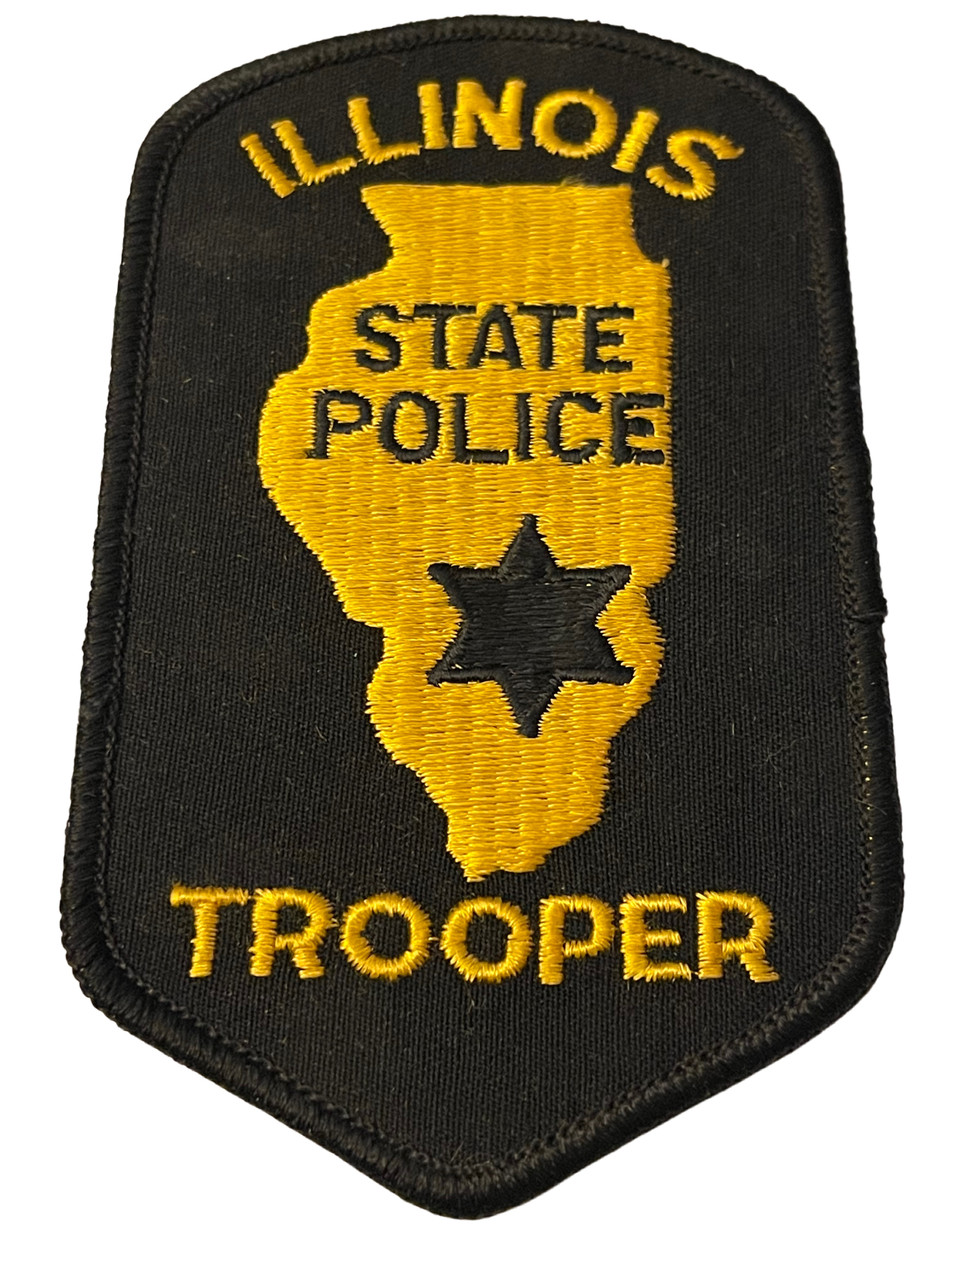 ITALIAN STATE POLICE PATCH